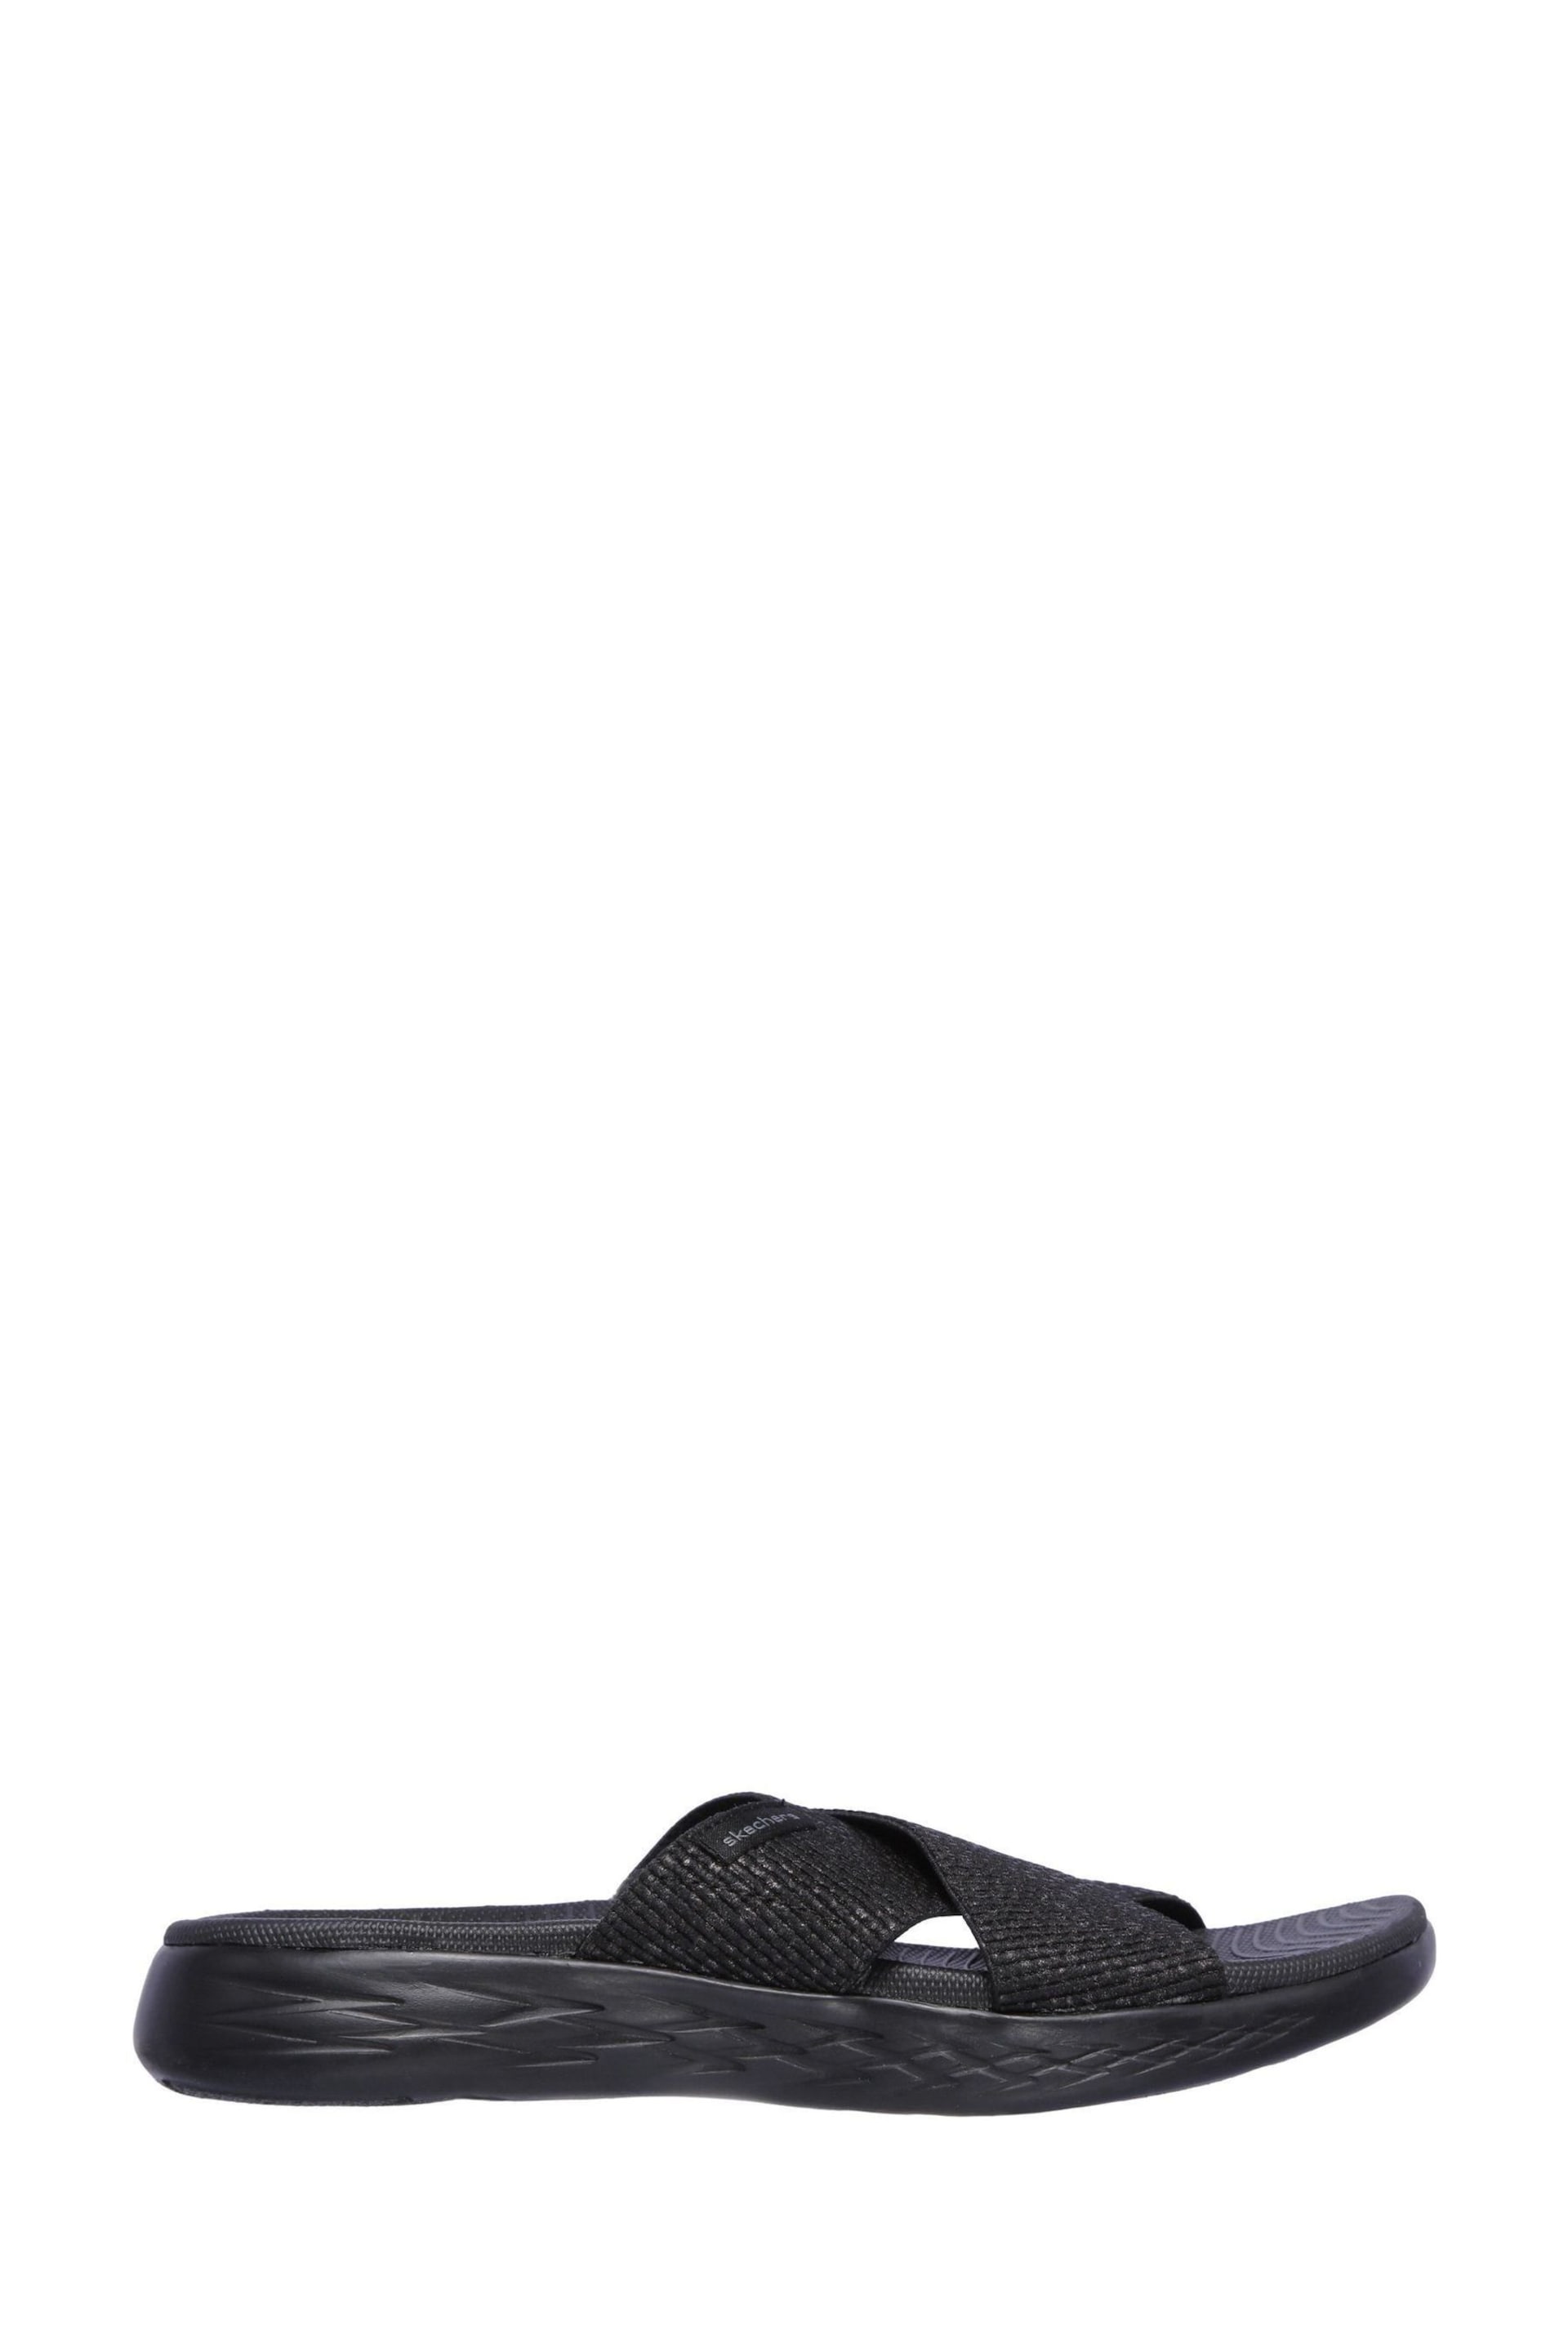 Skechers Black On-The-Go 600 Glistening Womens Sandals - Image 5 of 5